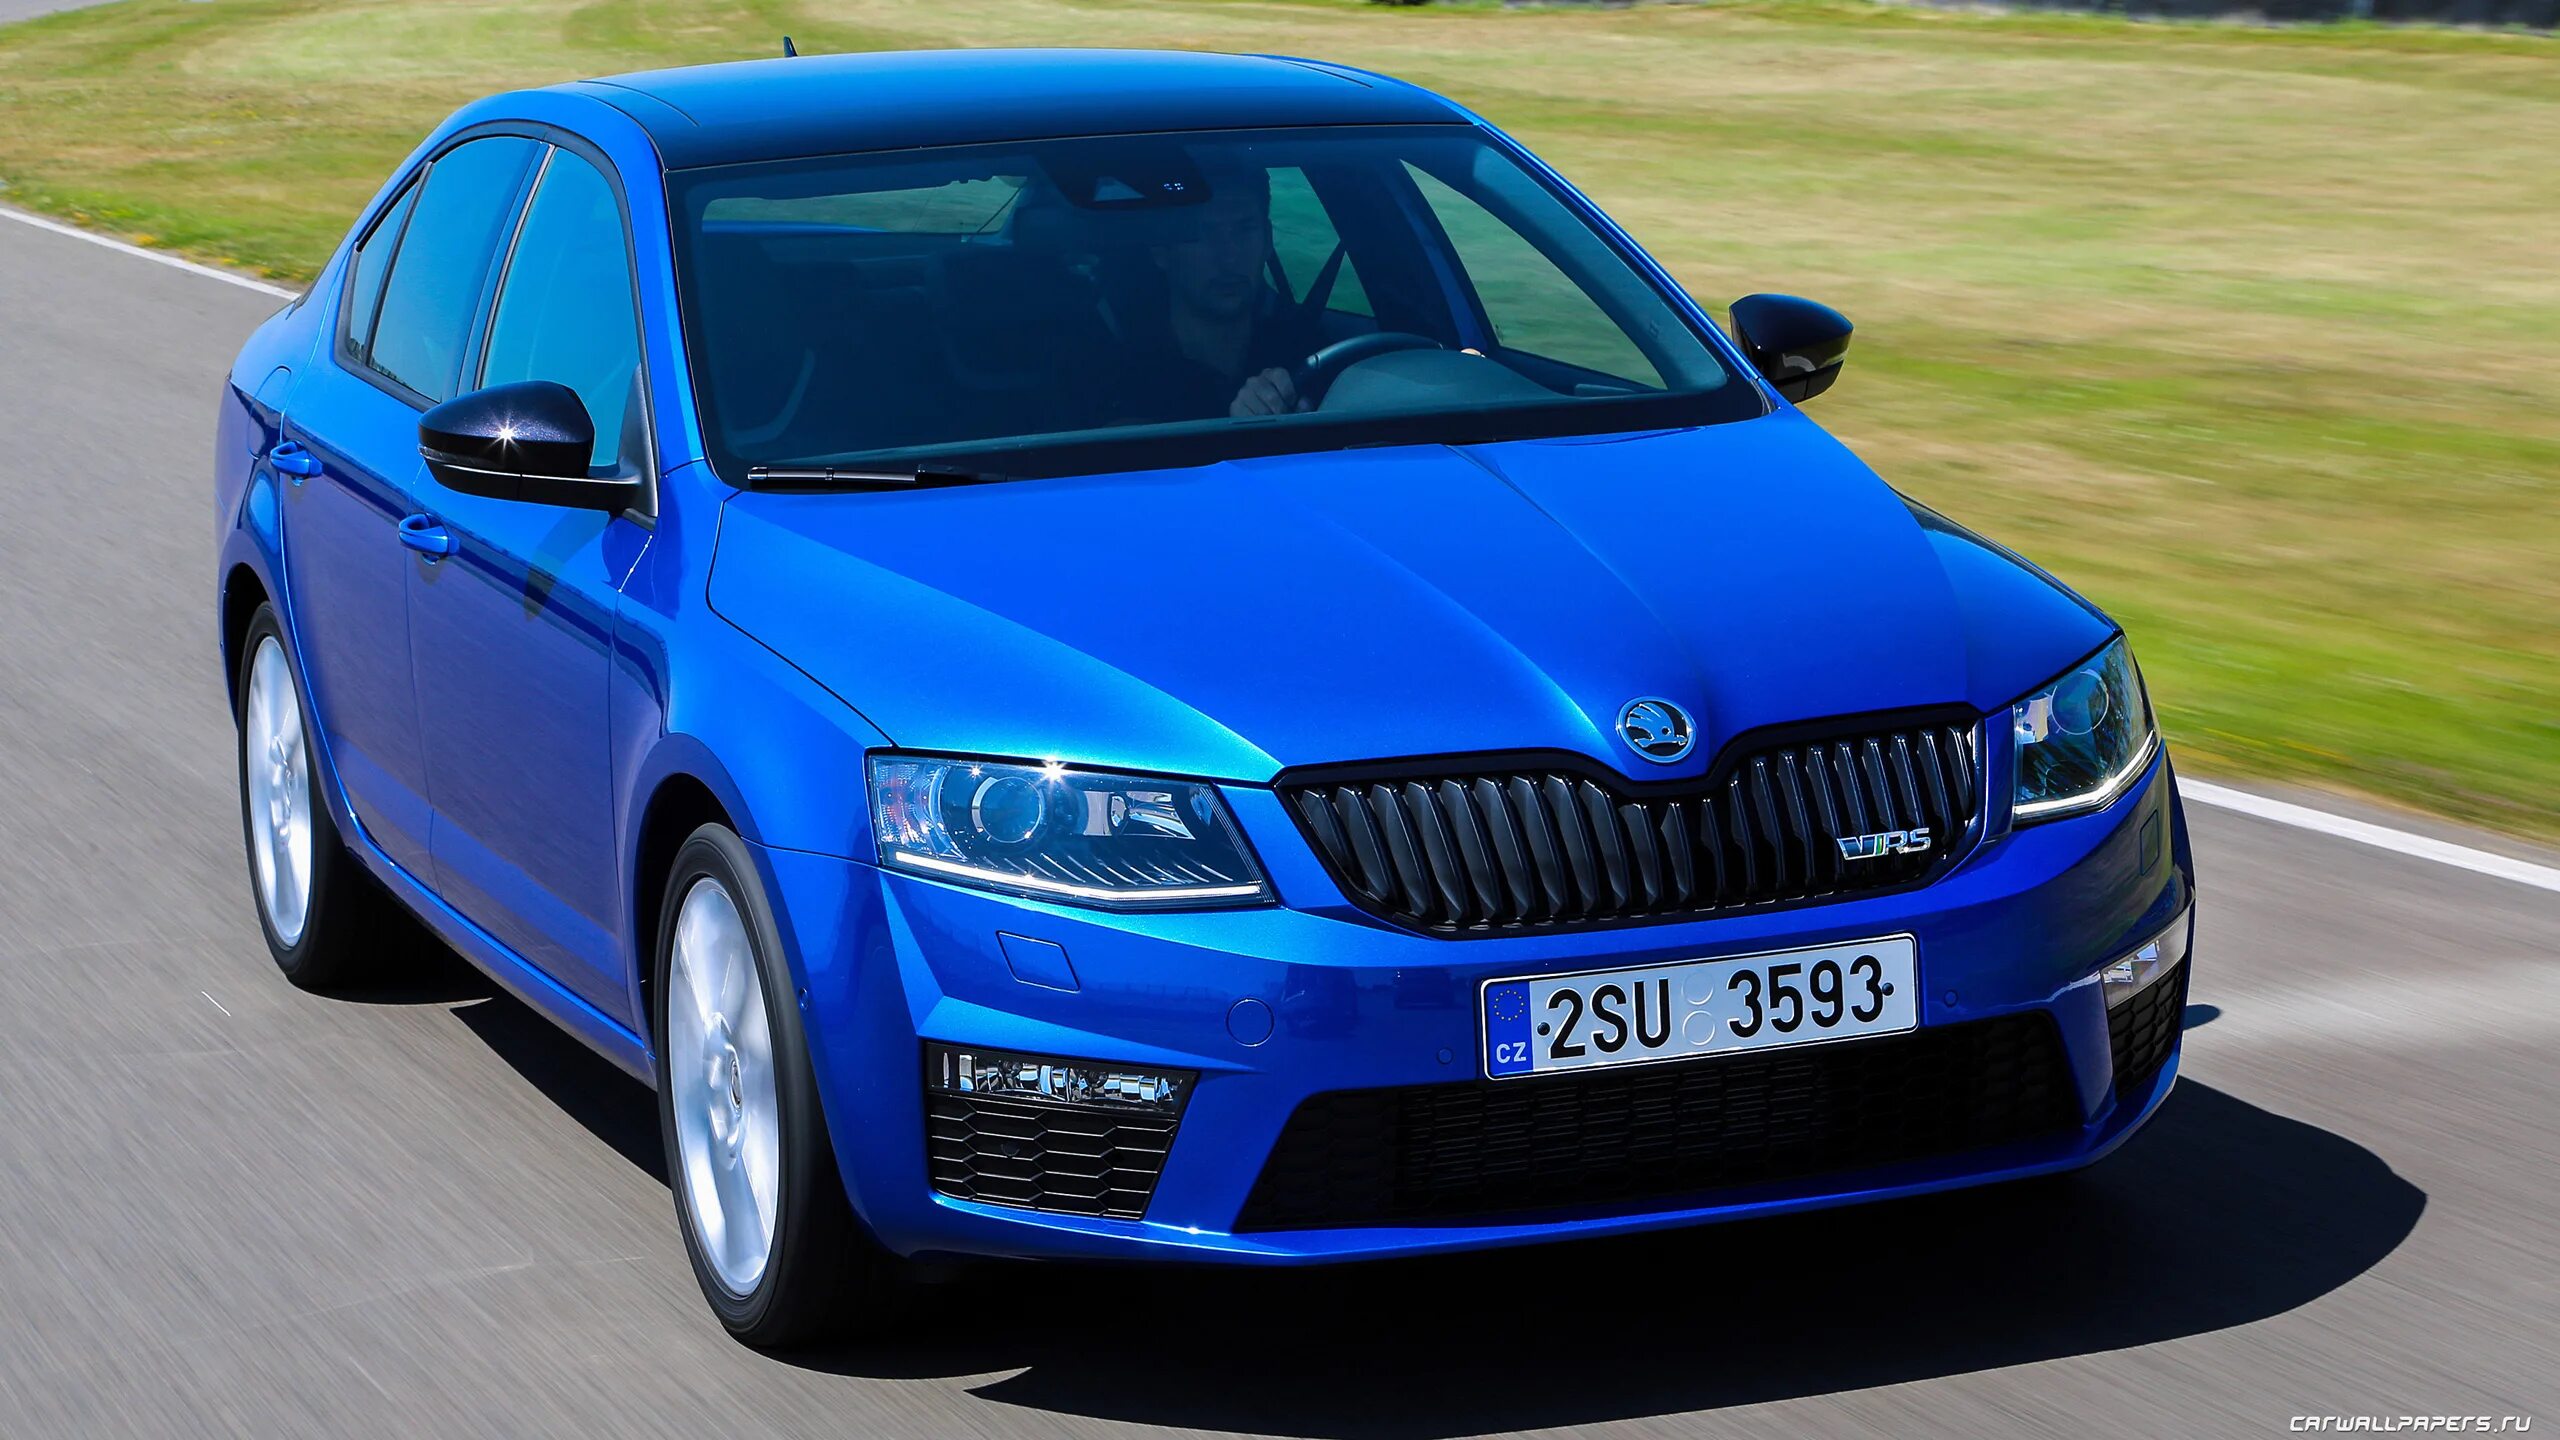 Skoda octavia rs 2016. Skoda Octavia RS 2014. Skoda Octavia RS 2013.